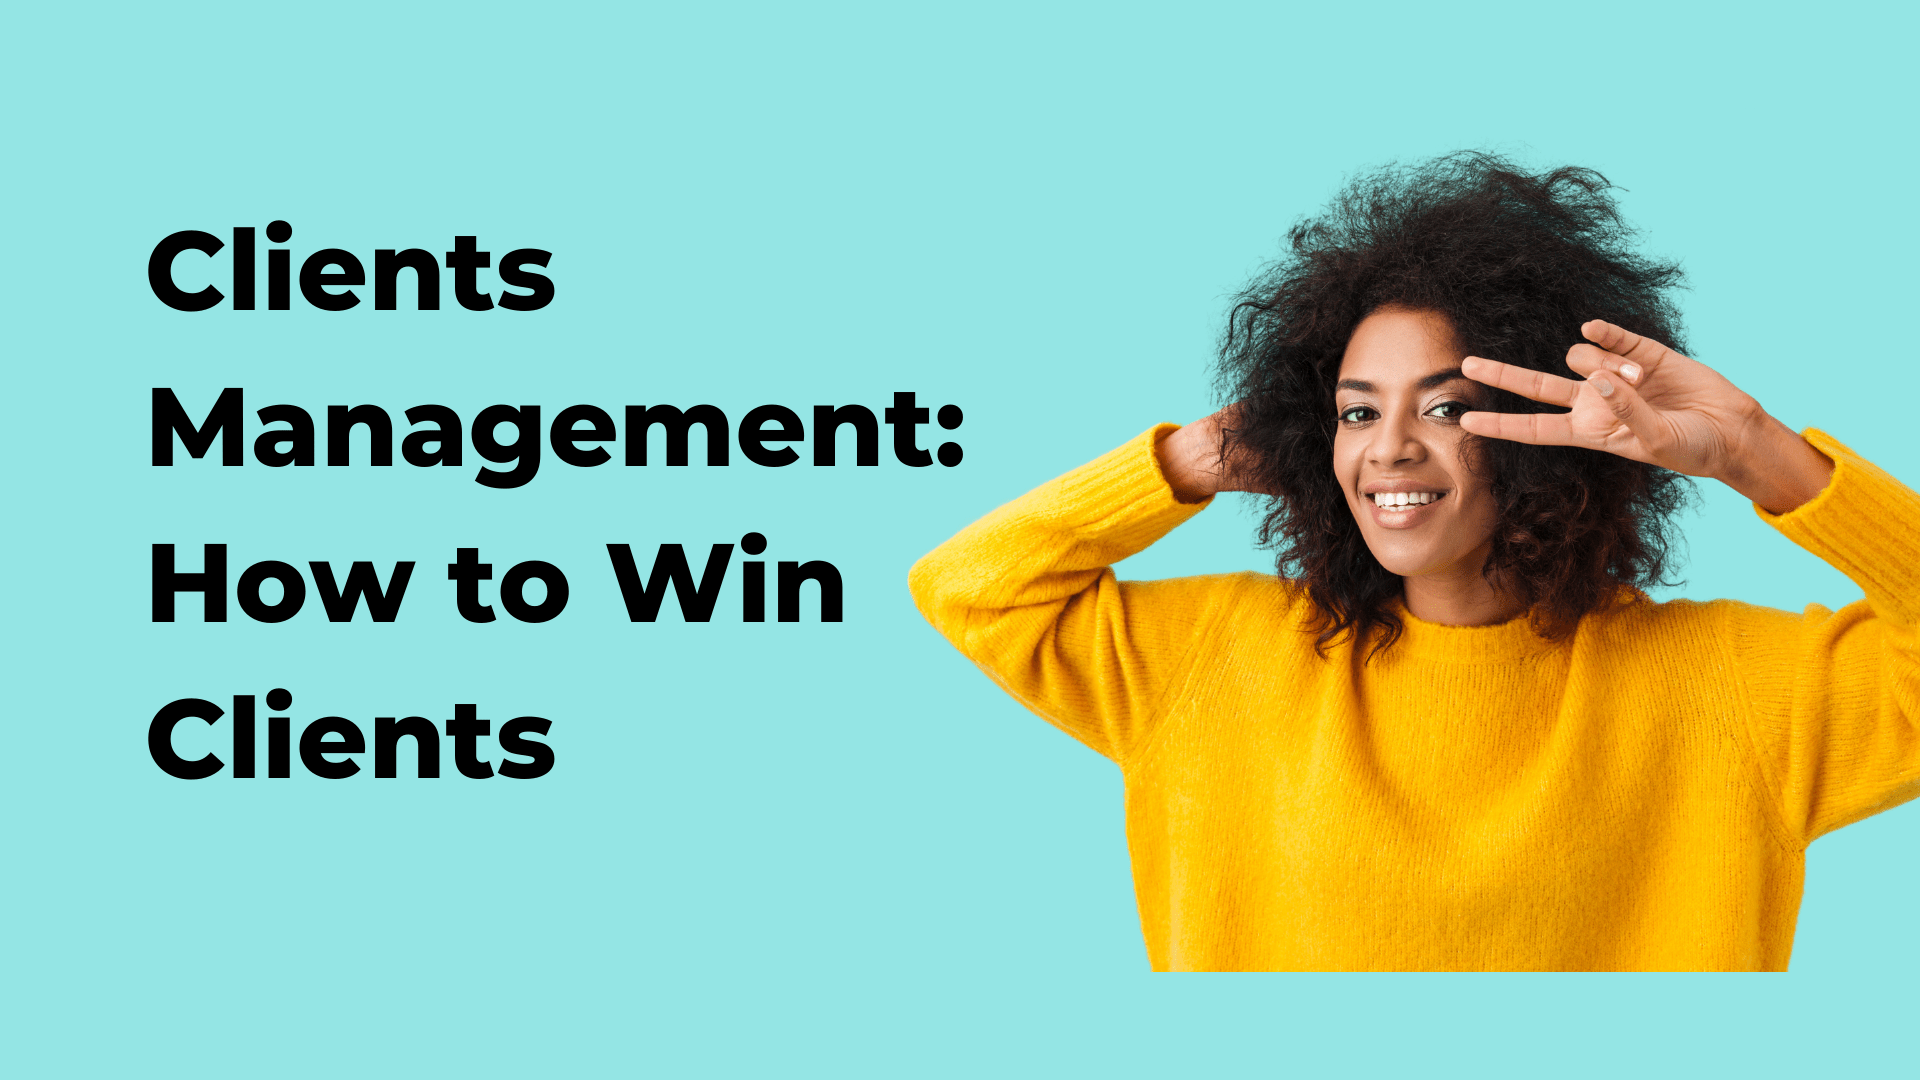 Client Management: How to Win Clients